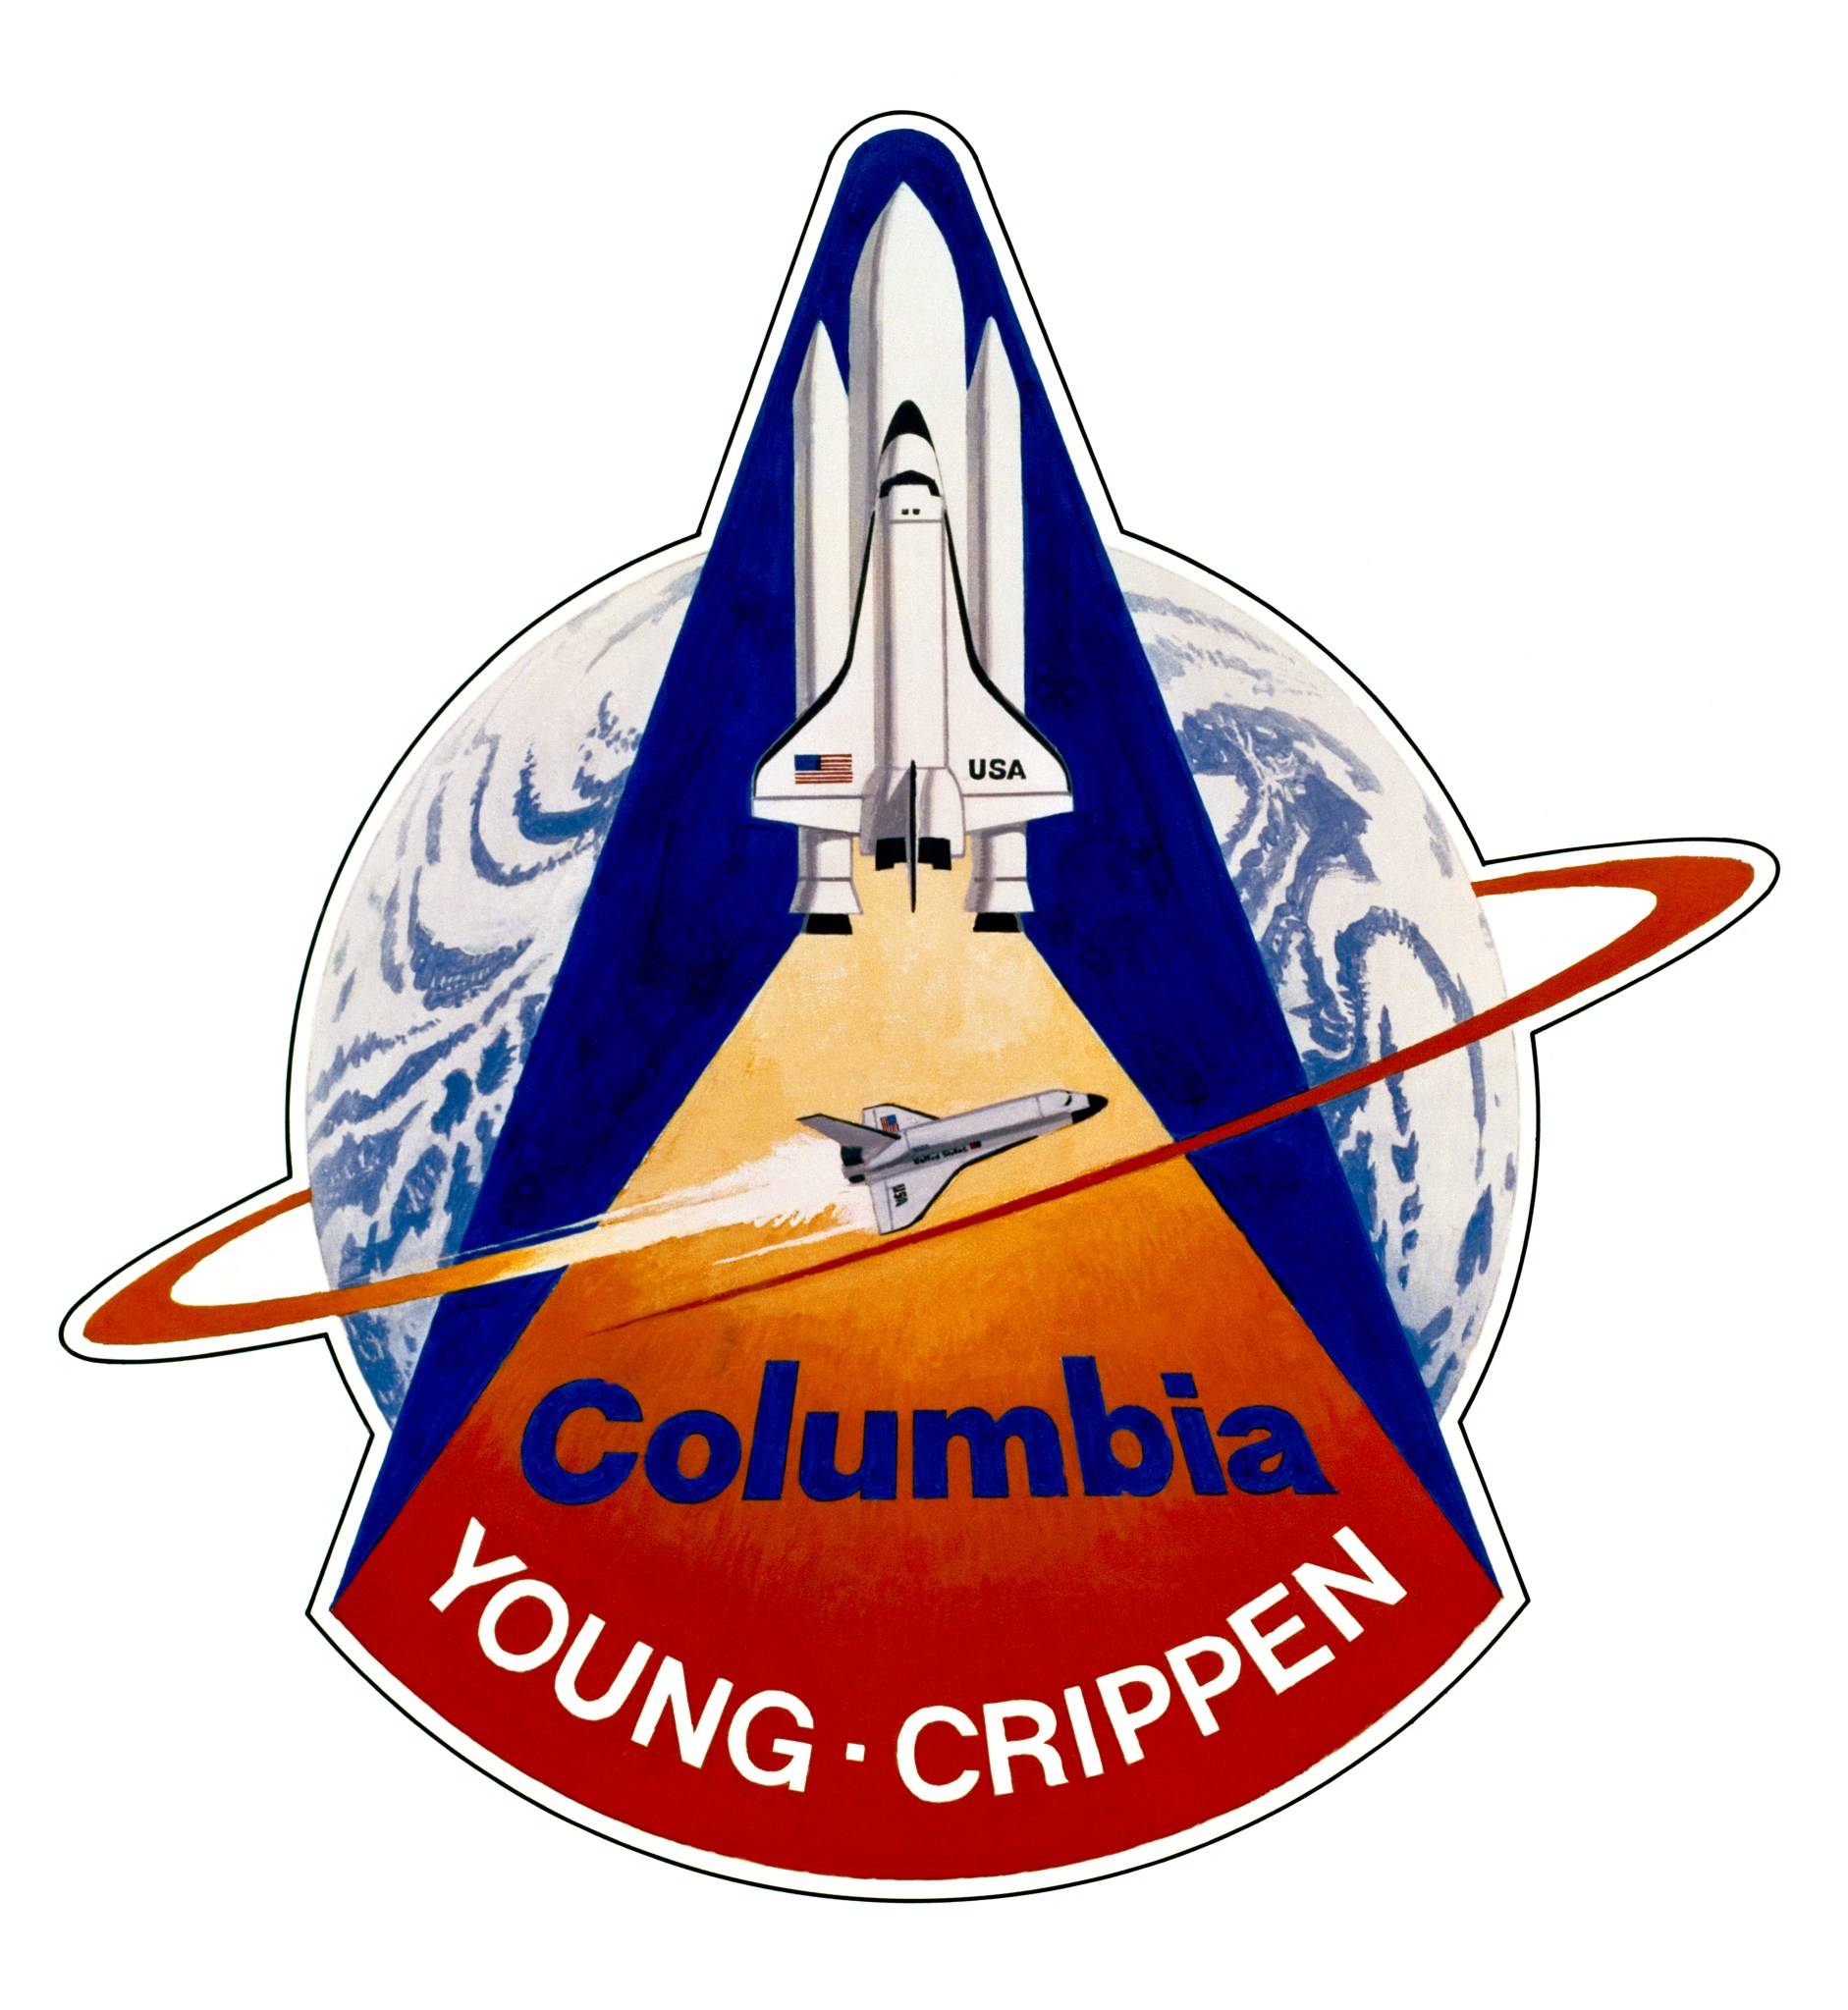 STS-1 mission patch